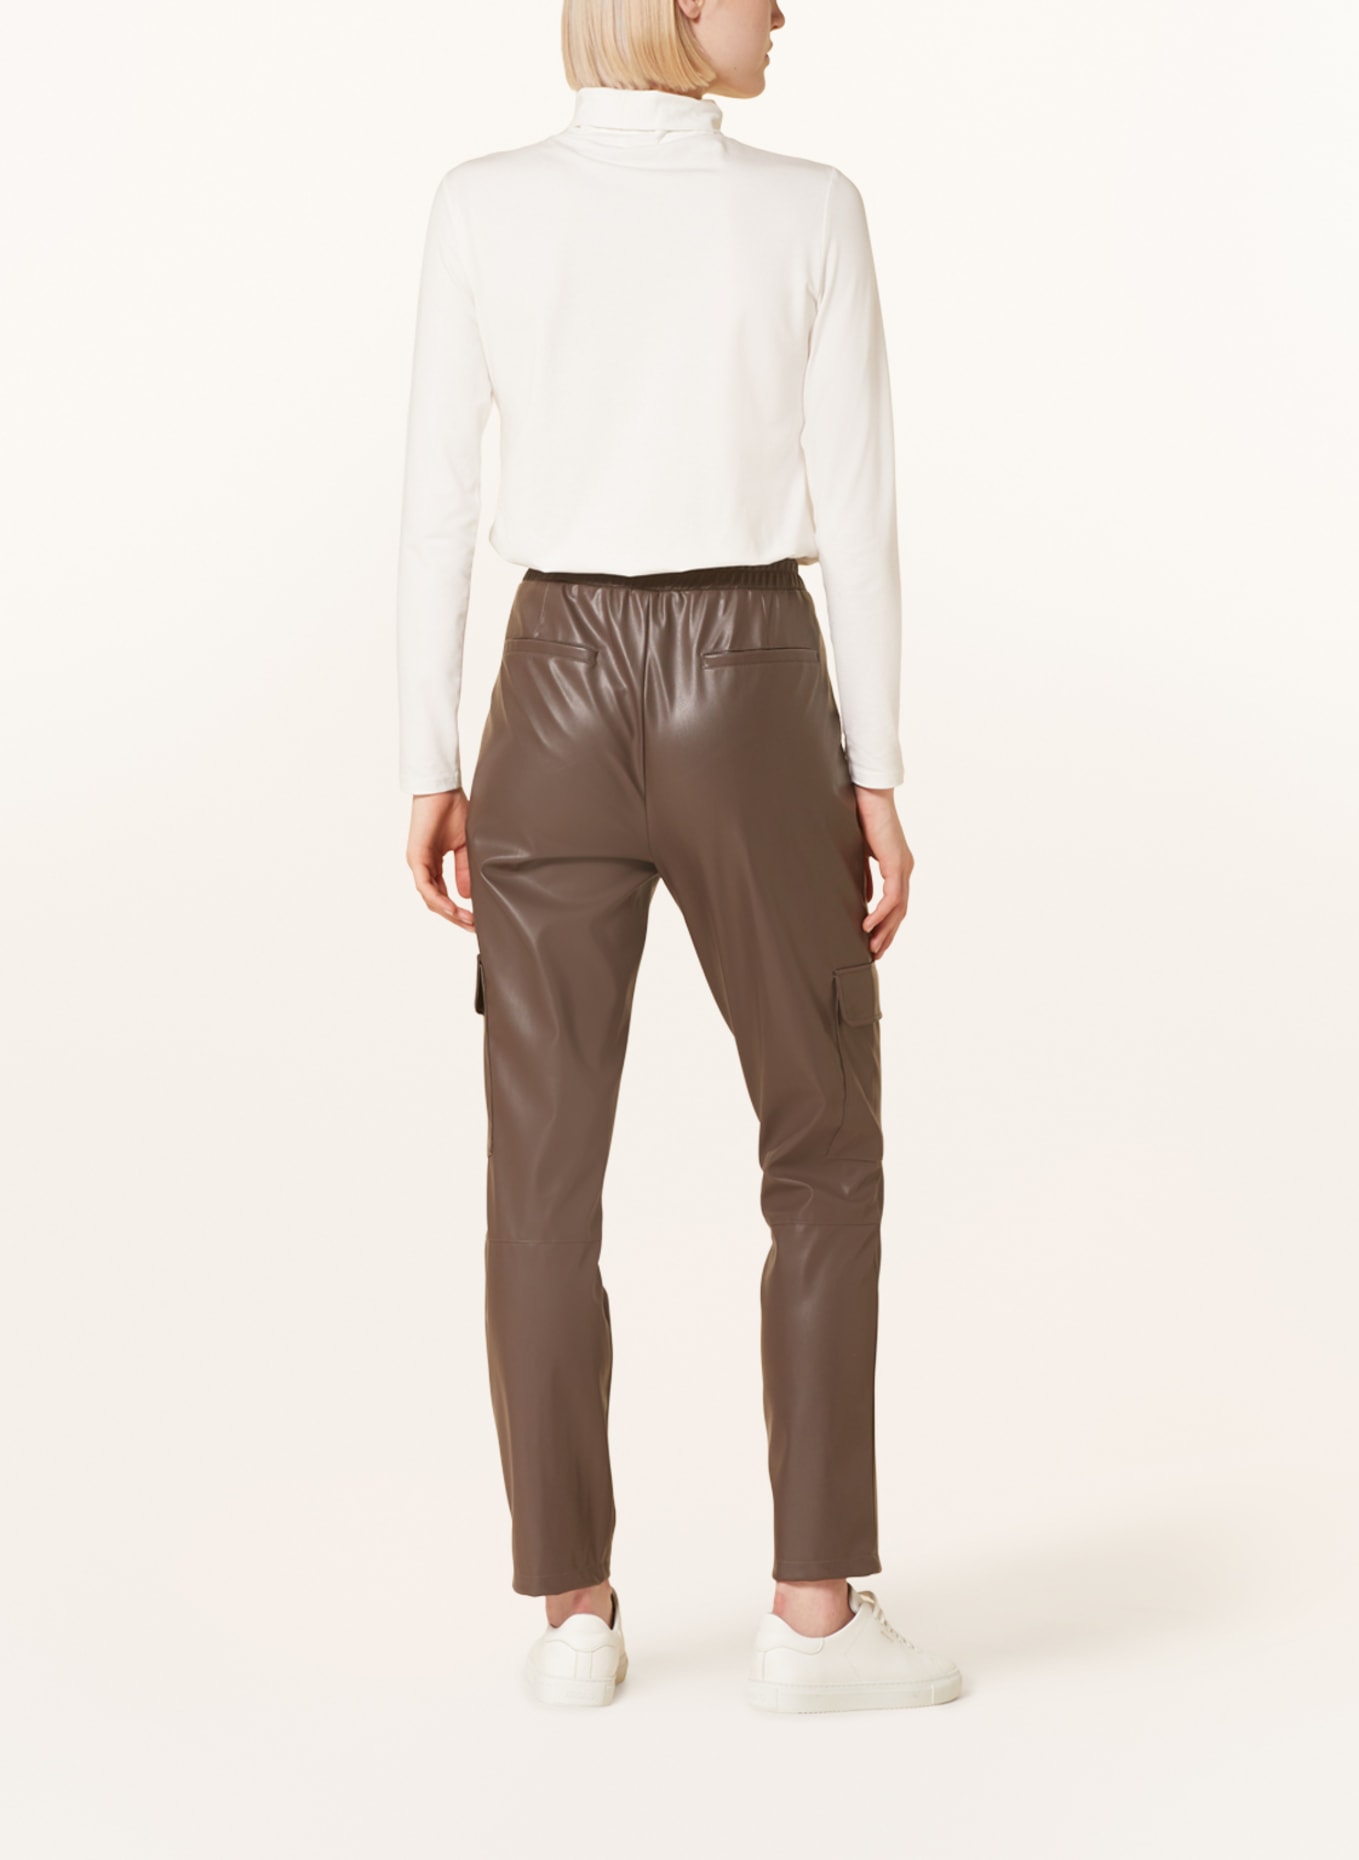 darling harbour Pants in jogger style in leather look, Color: BROWN (Image 3)